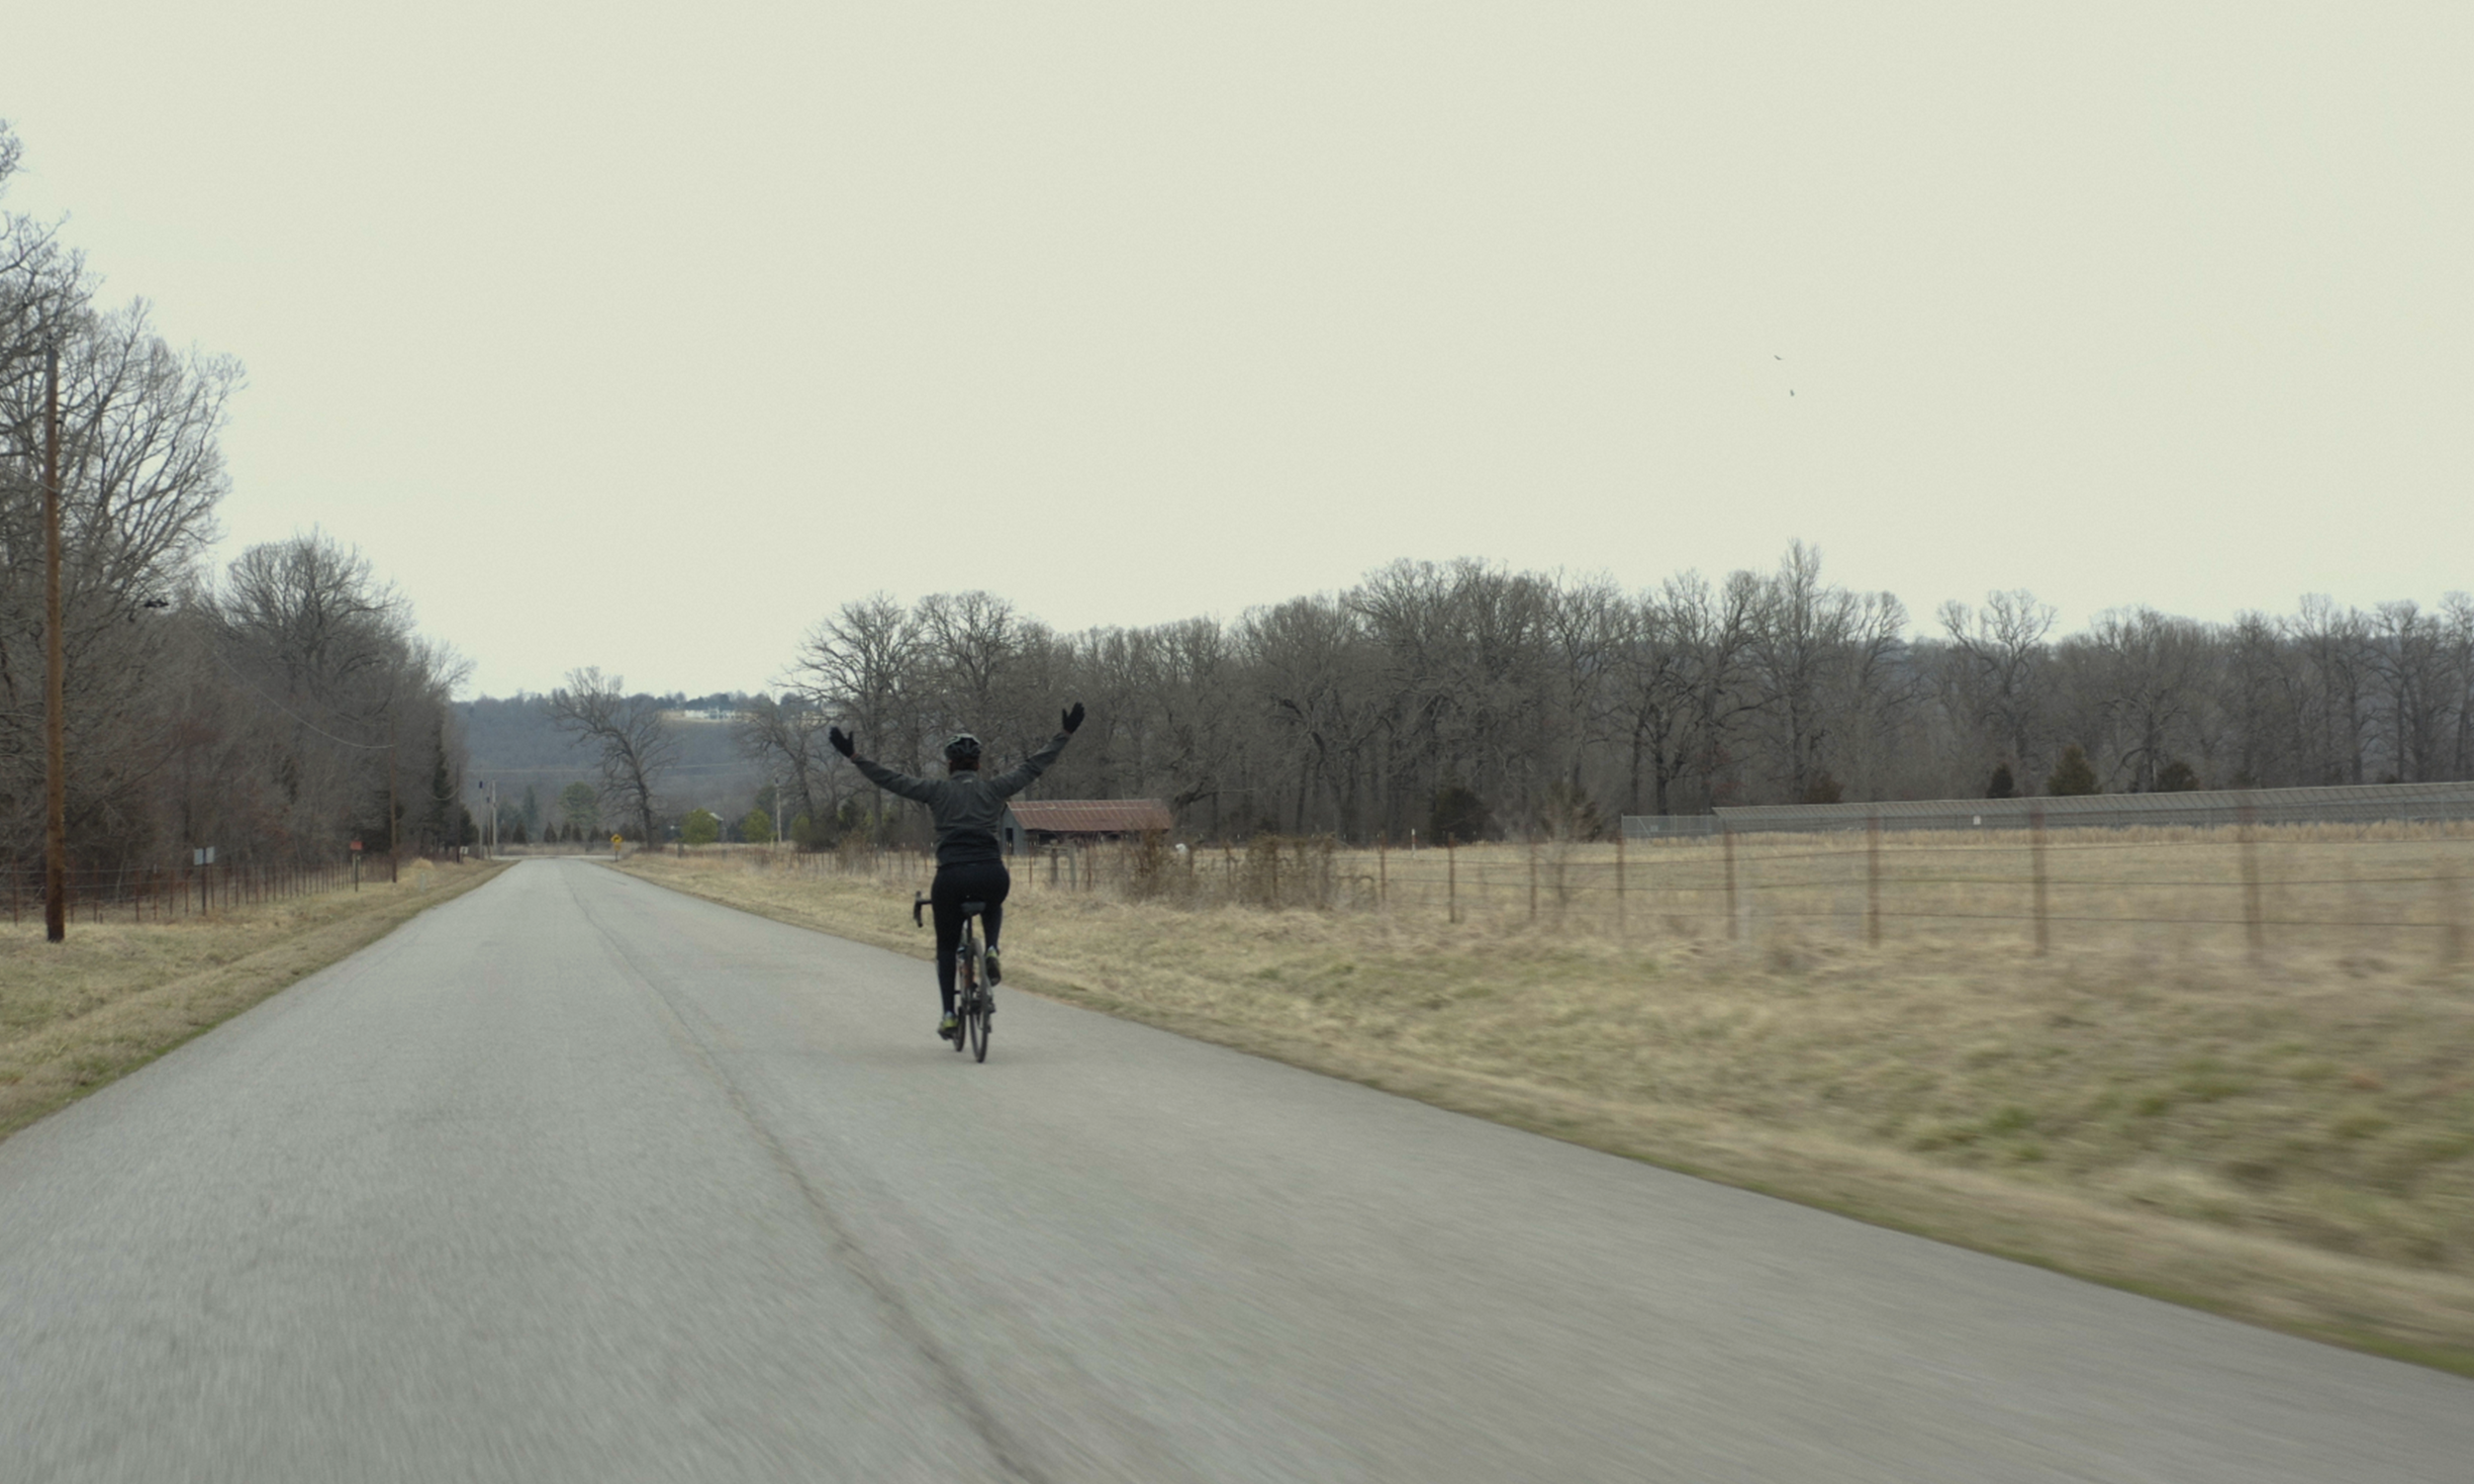 KC Cross riding down he road in Beyond the Binary